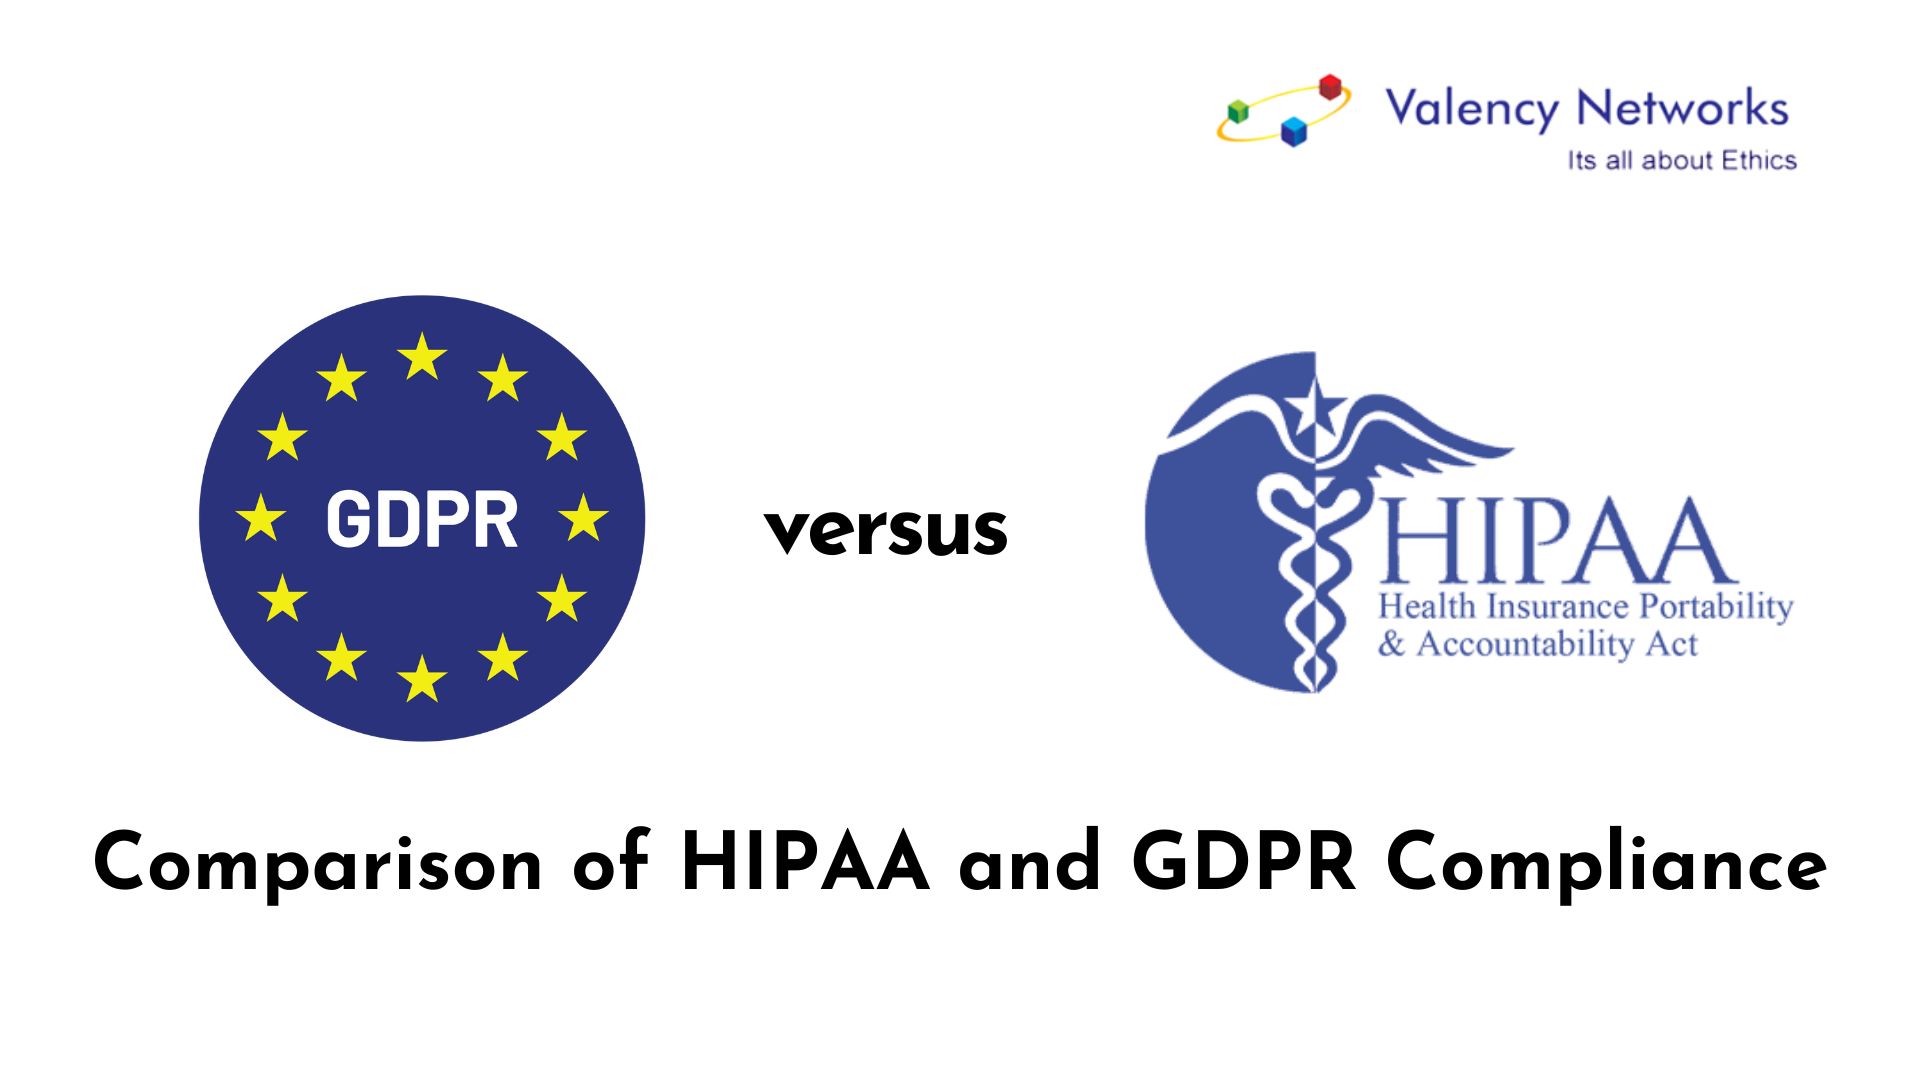 Comparison of HIPAA and GDPR Compliance